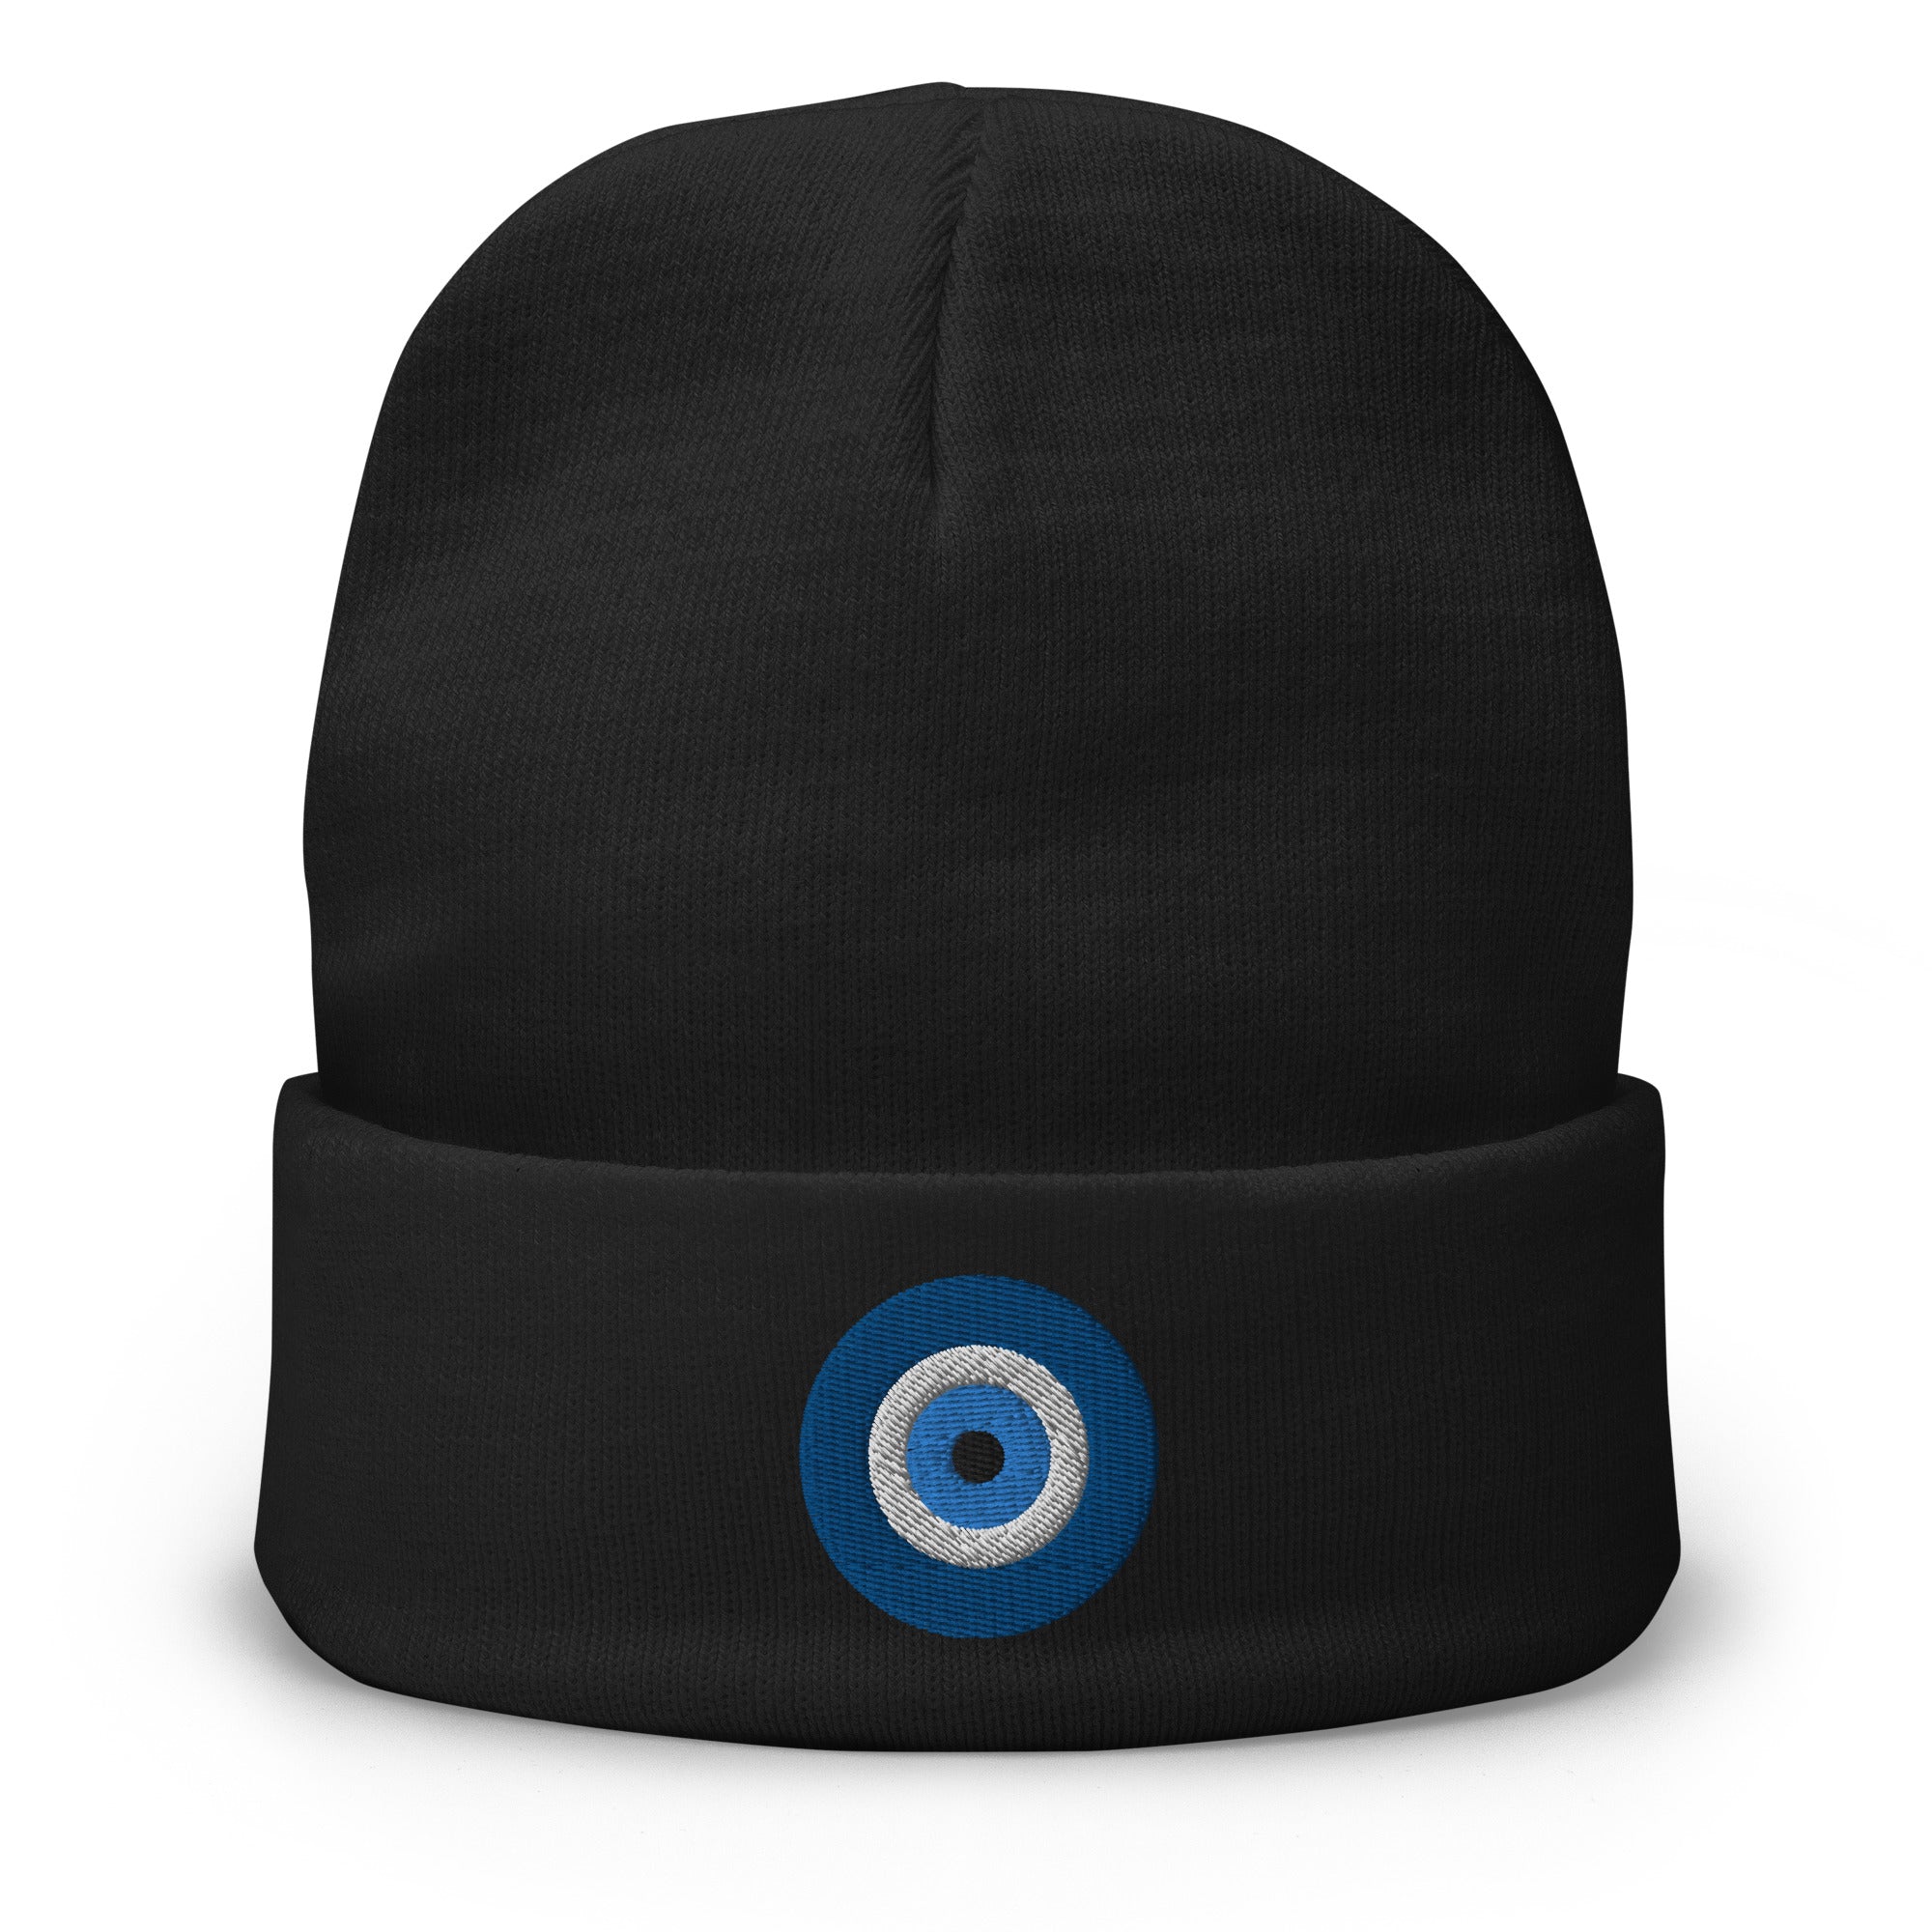 The Evil Eye Embroidered Cuff Beanie Supernatural Look or Stare - Edge of Life Designs